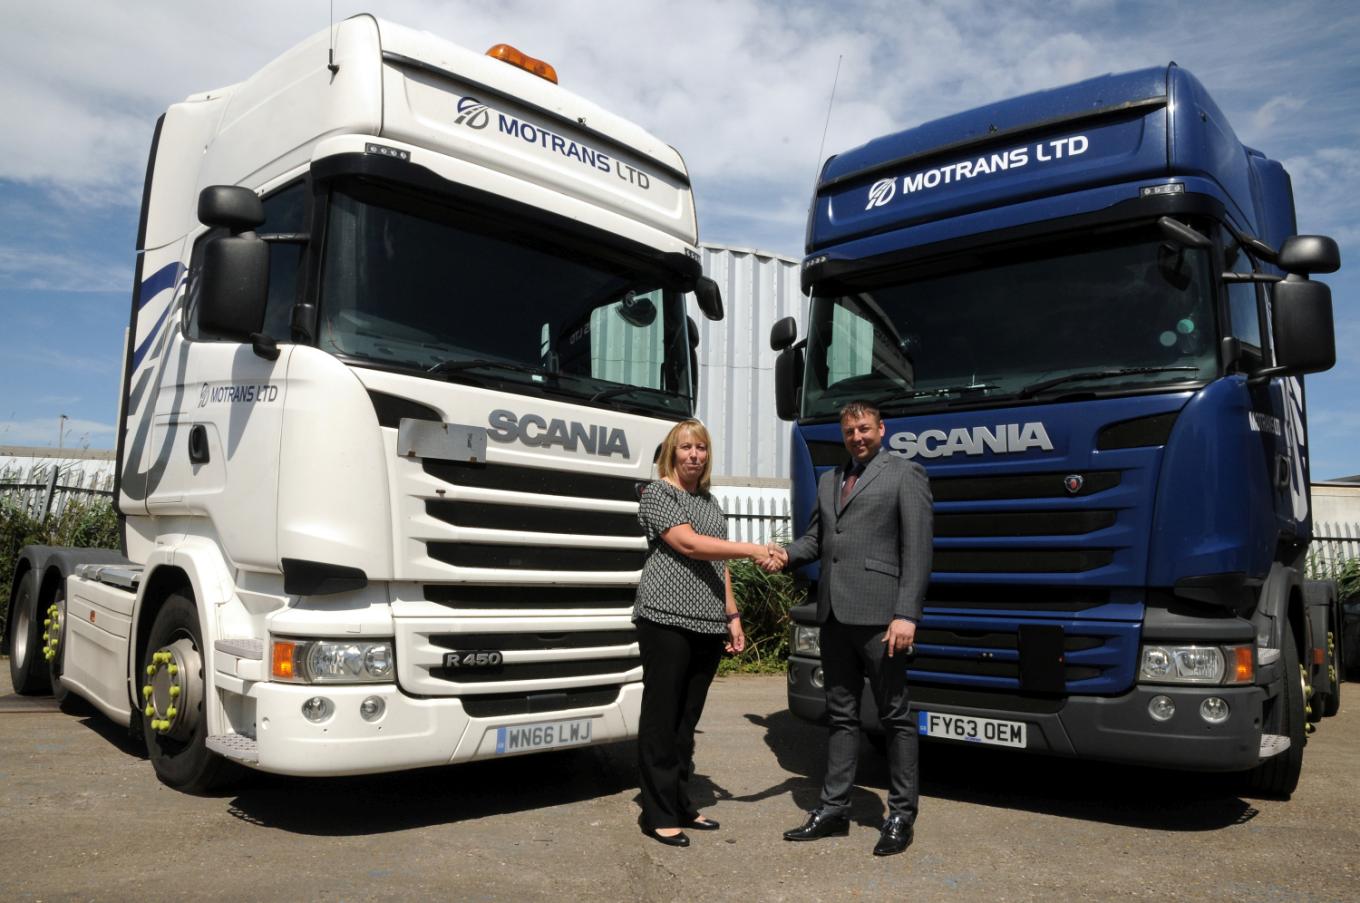 A man and a women shaking hands in front of 2 Motrans lorries